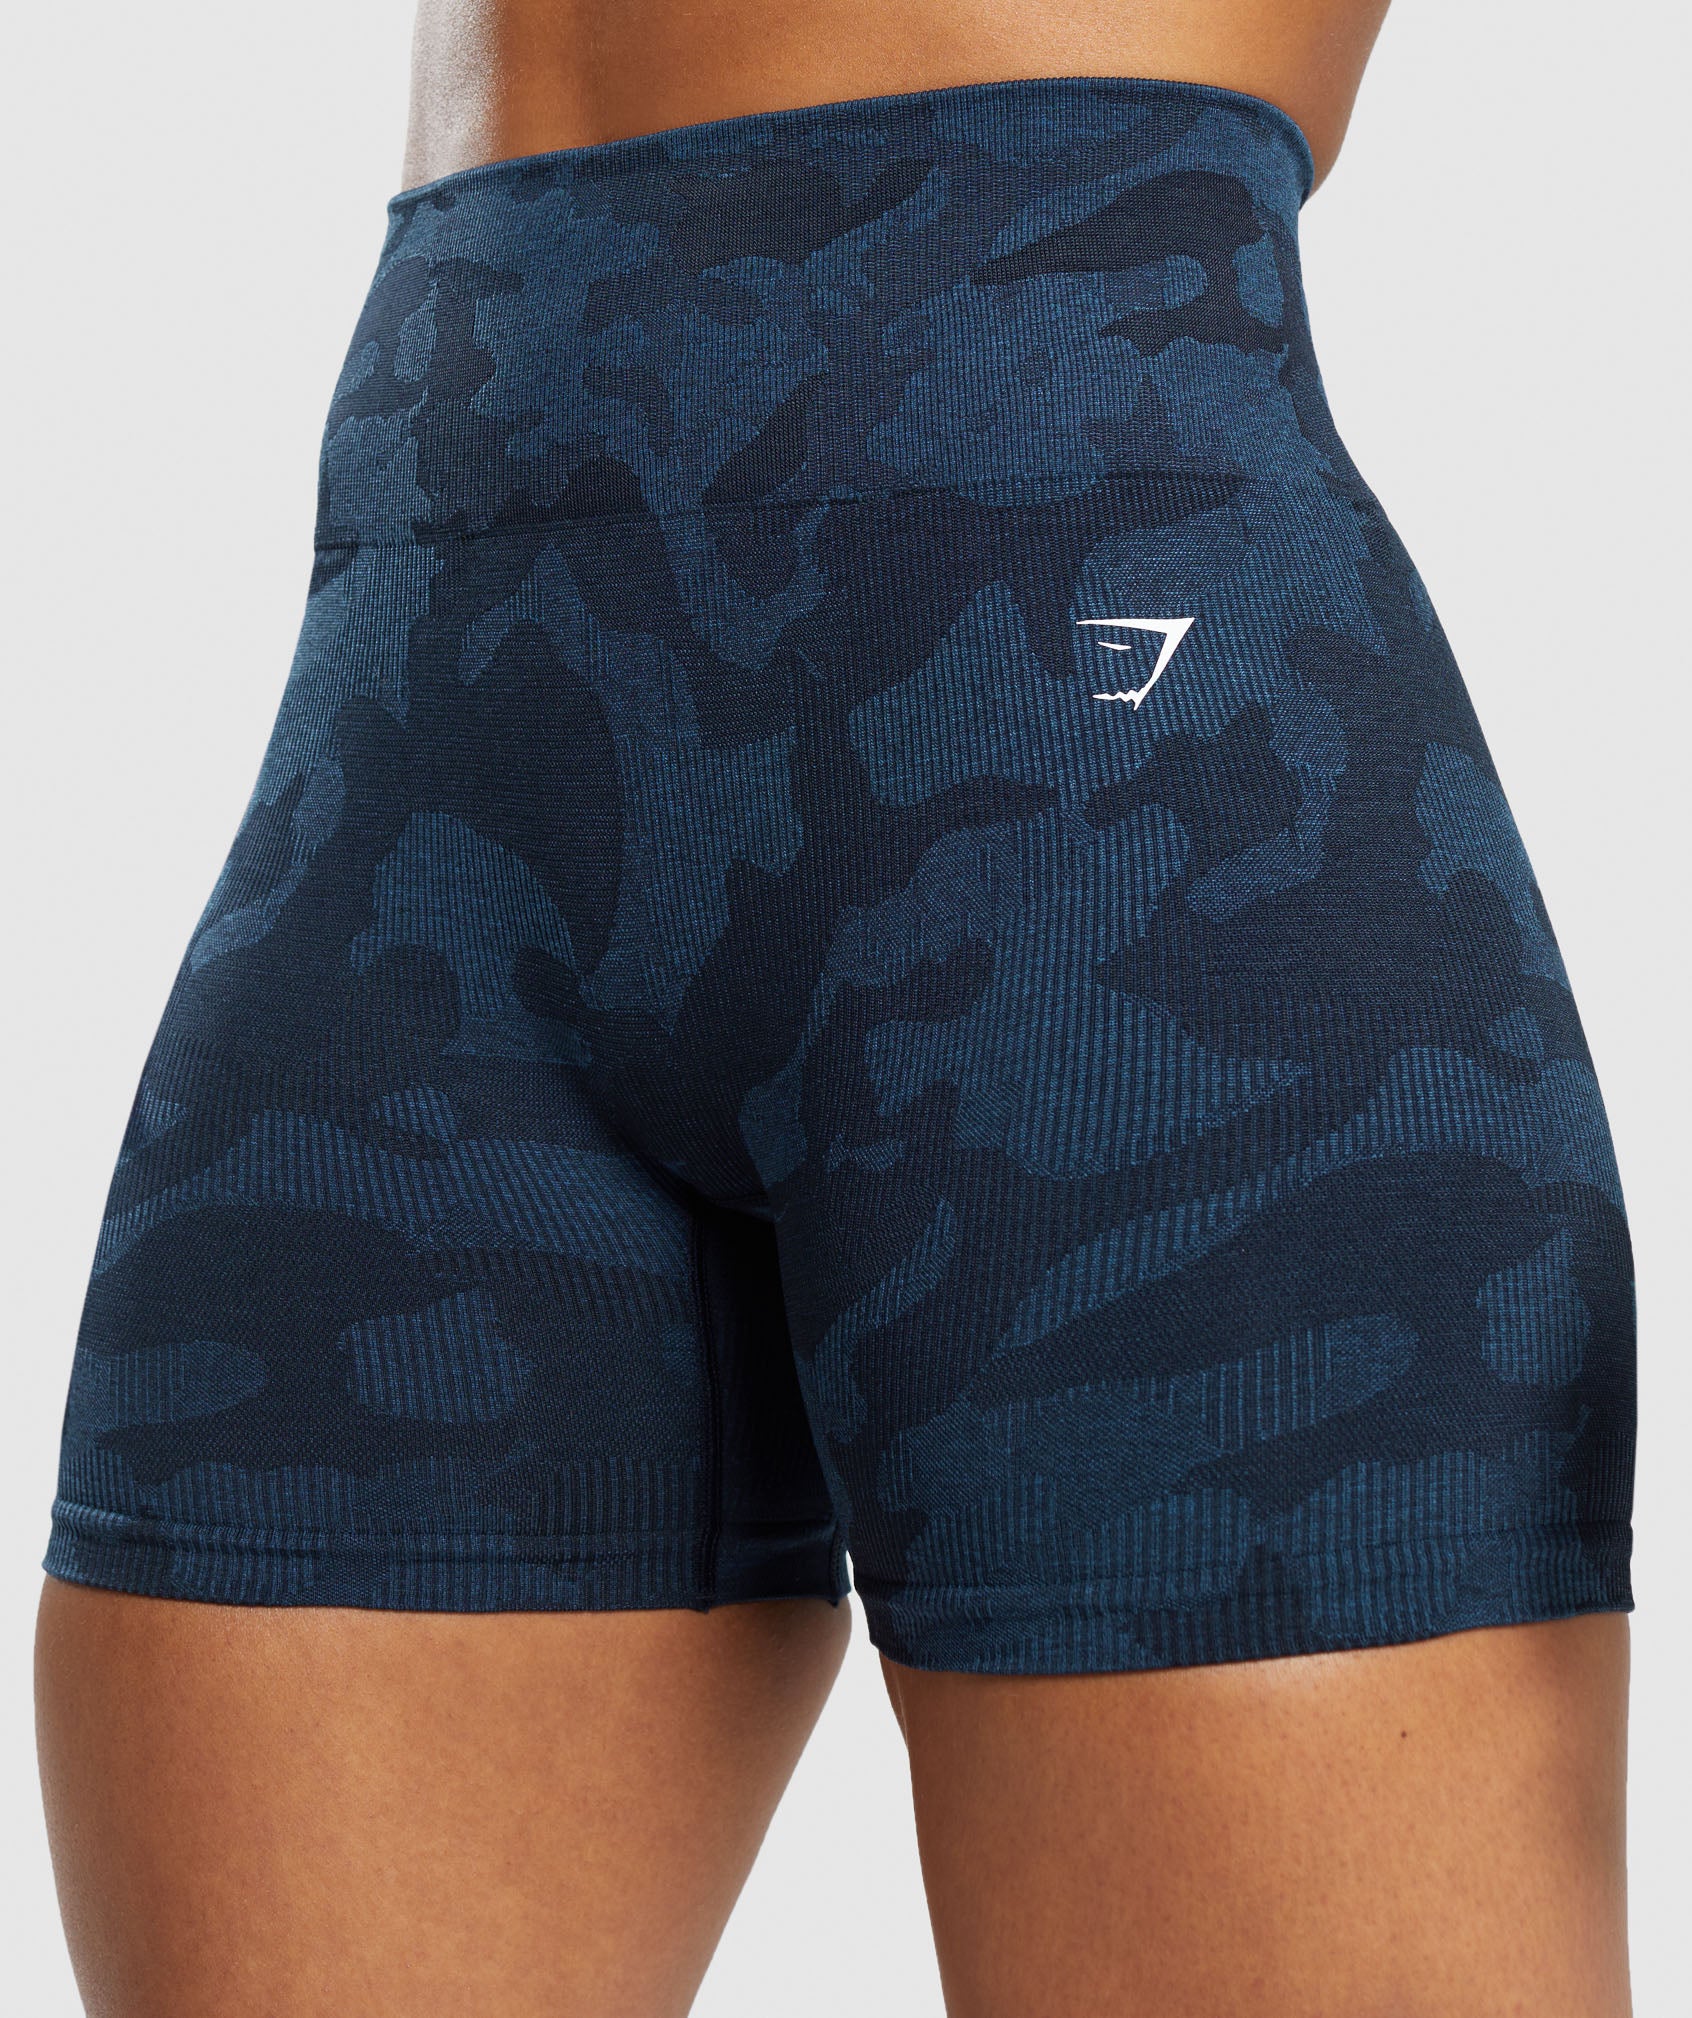 Adapt Camo Seamless Ribbed Shorts in Midnight Blue/Ash Blue - view 5